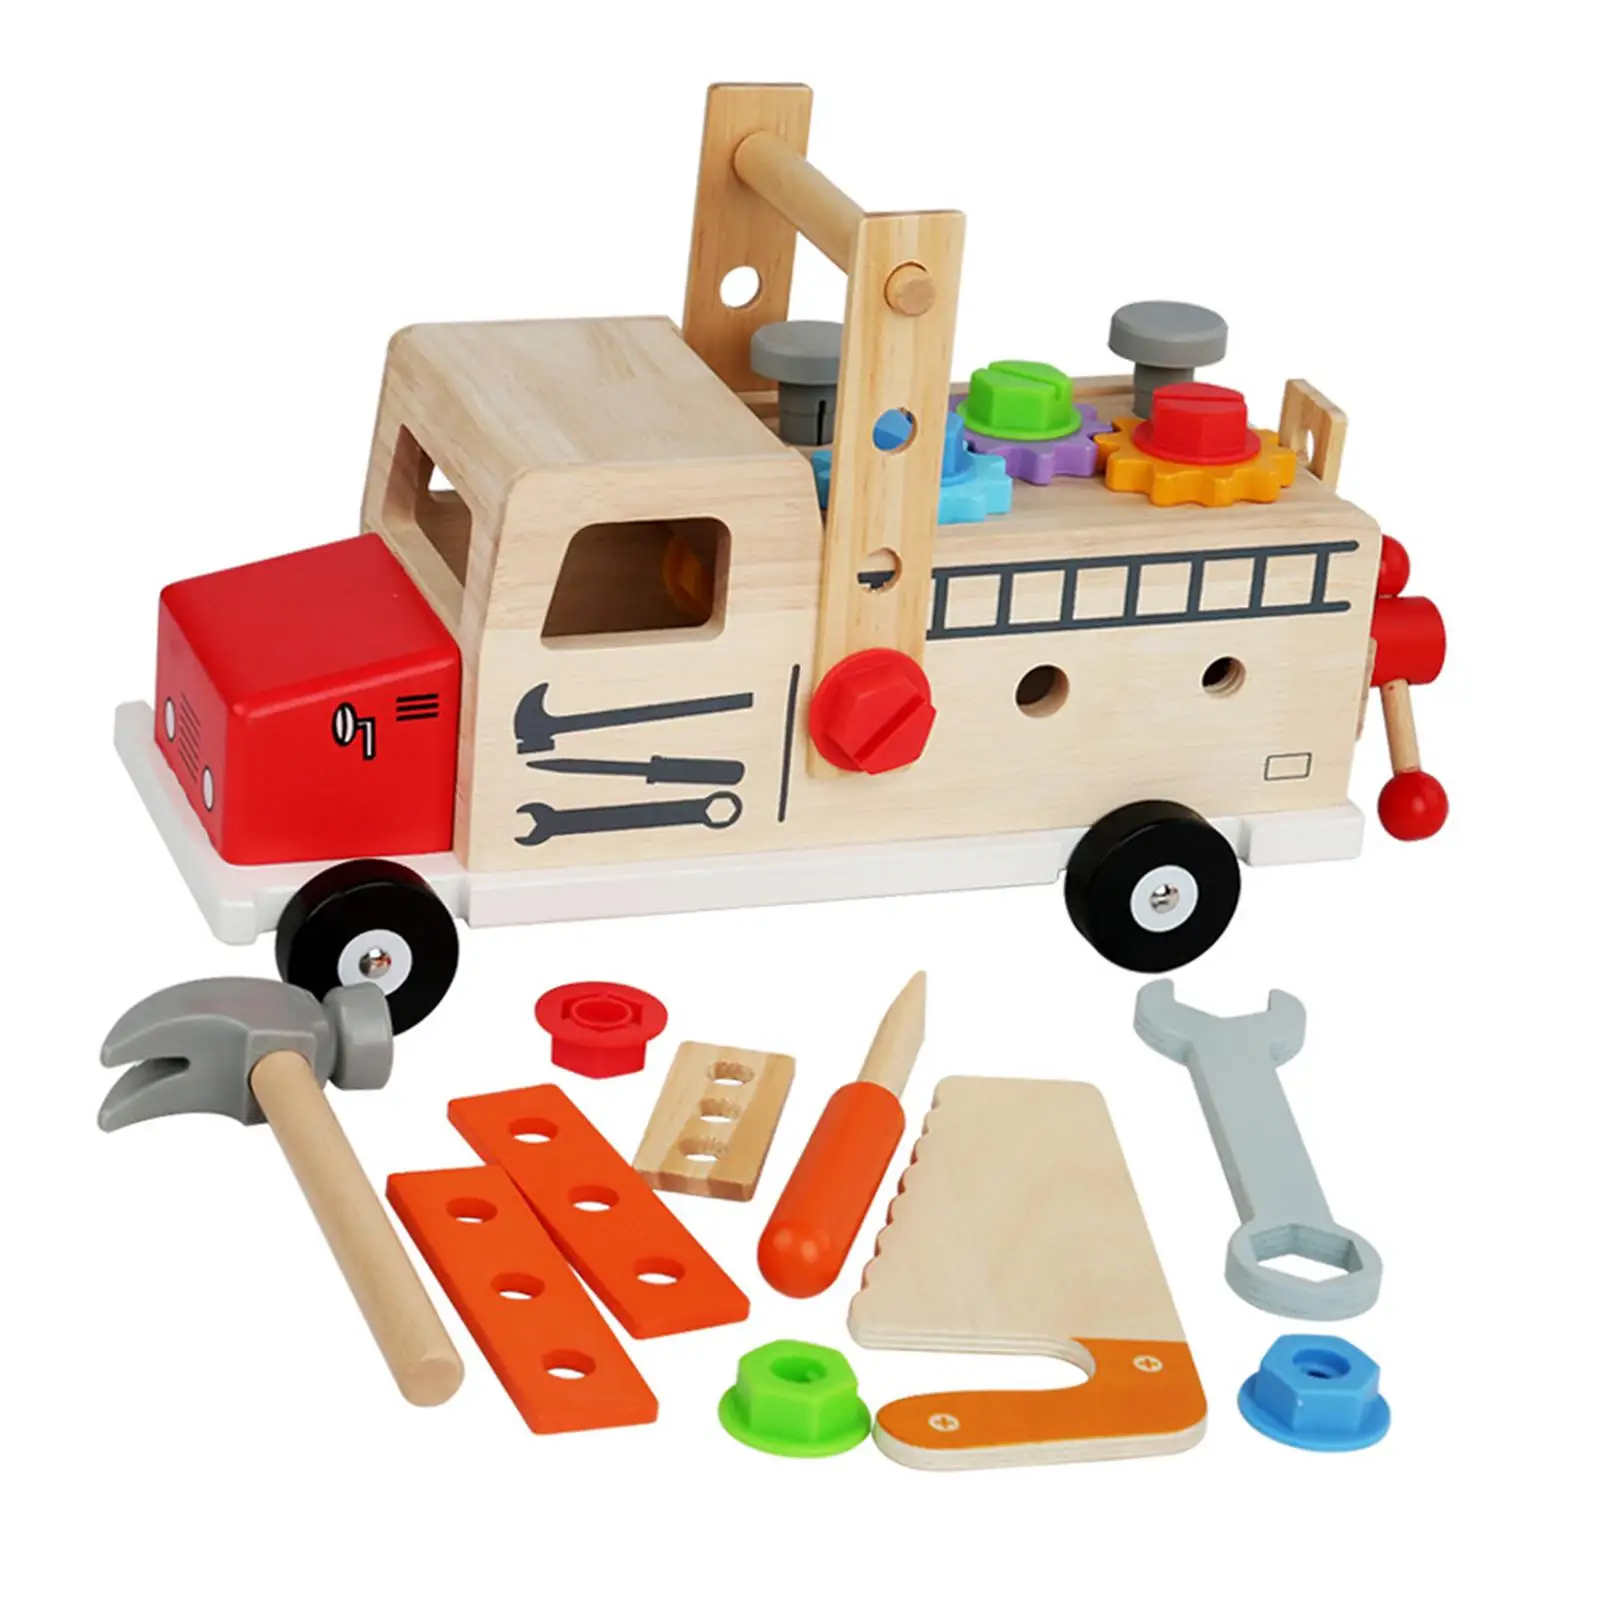 Wood Kids Tool Set Creative Stem Construction Toy Pretend Play Tool Kits for Boys Girls Kid 3 4 5 6 Years Old Party Favors